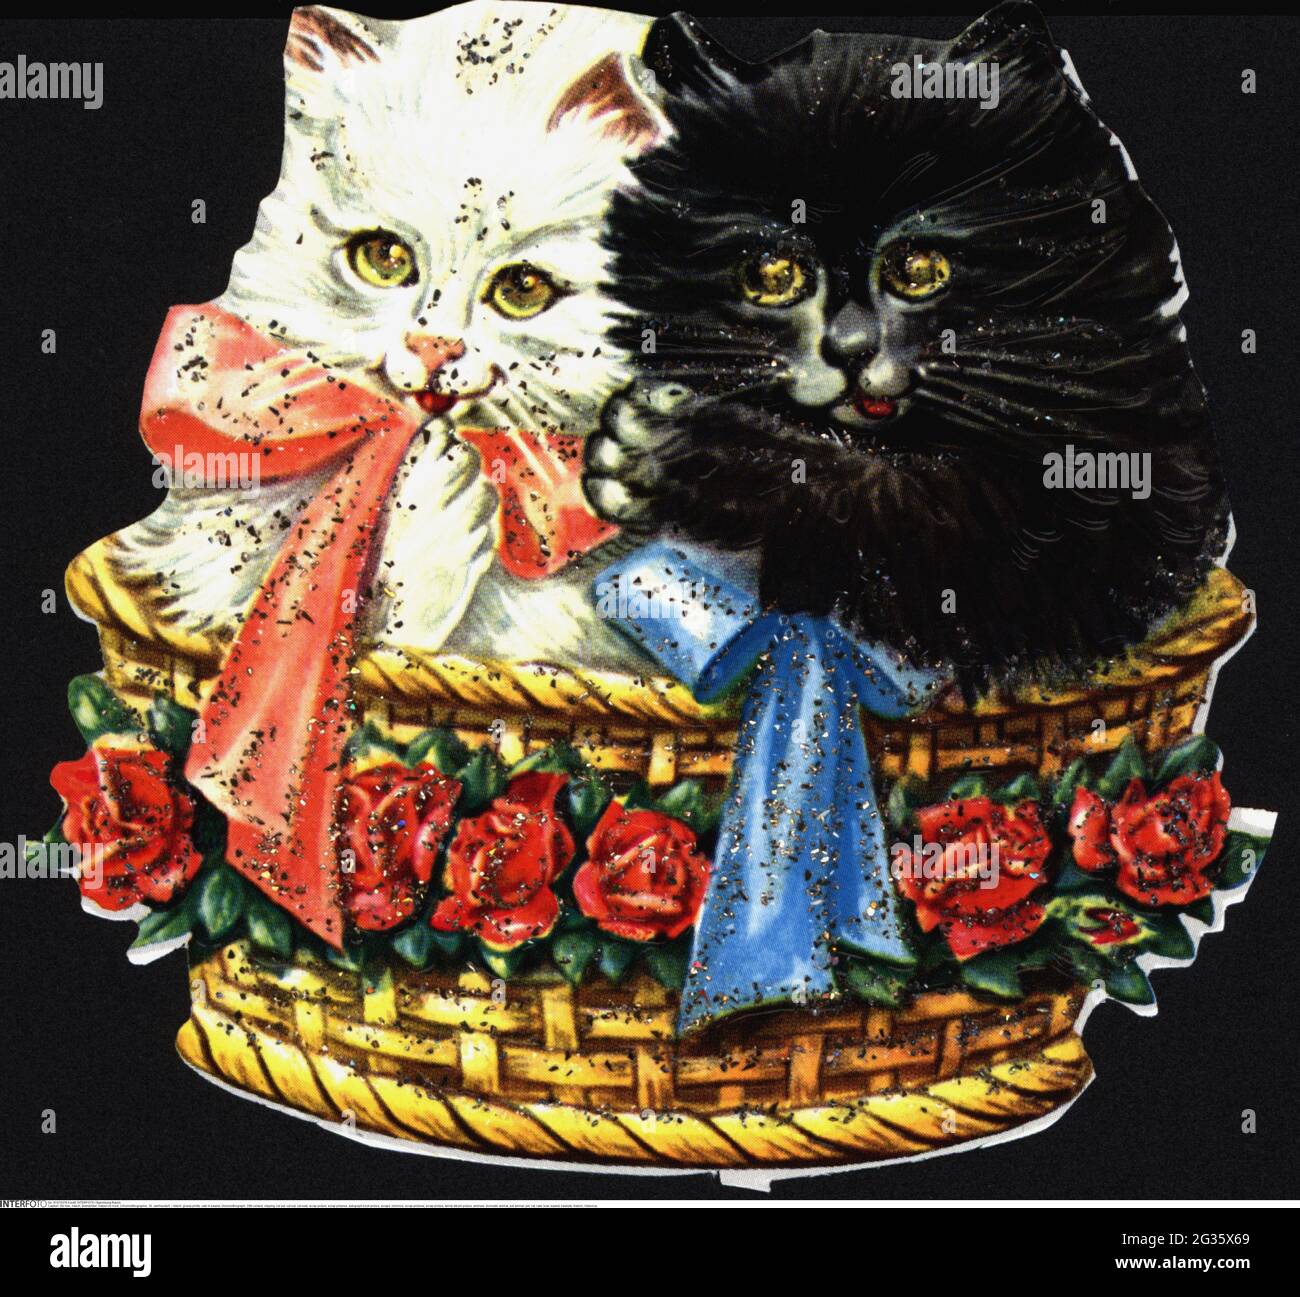 Kitsch, Hochglanzdrucke, Katzen im Korb, Chromolithographie, 20. Jahrhundert, Clipping, cut out, cut-out, ADDITIONAL-RIGHTS-CLEARANCE-INFO-NOT-AVAILABLE Stockfoto